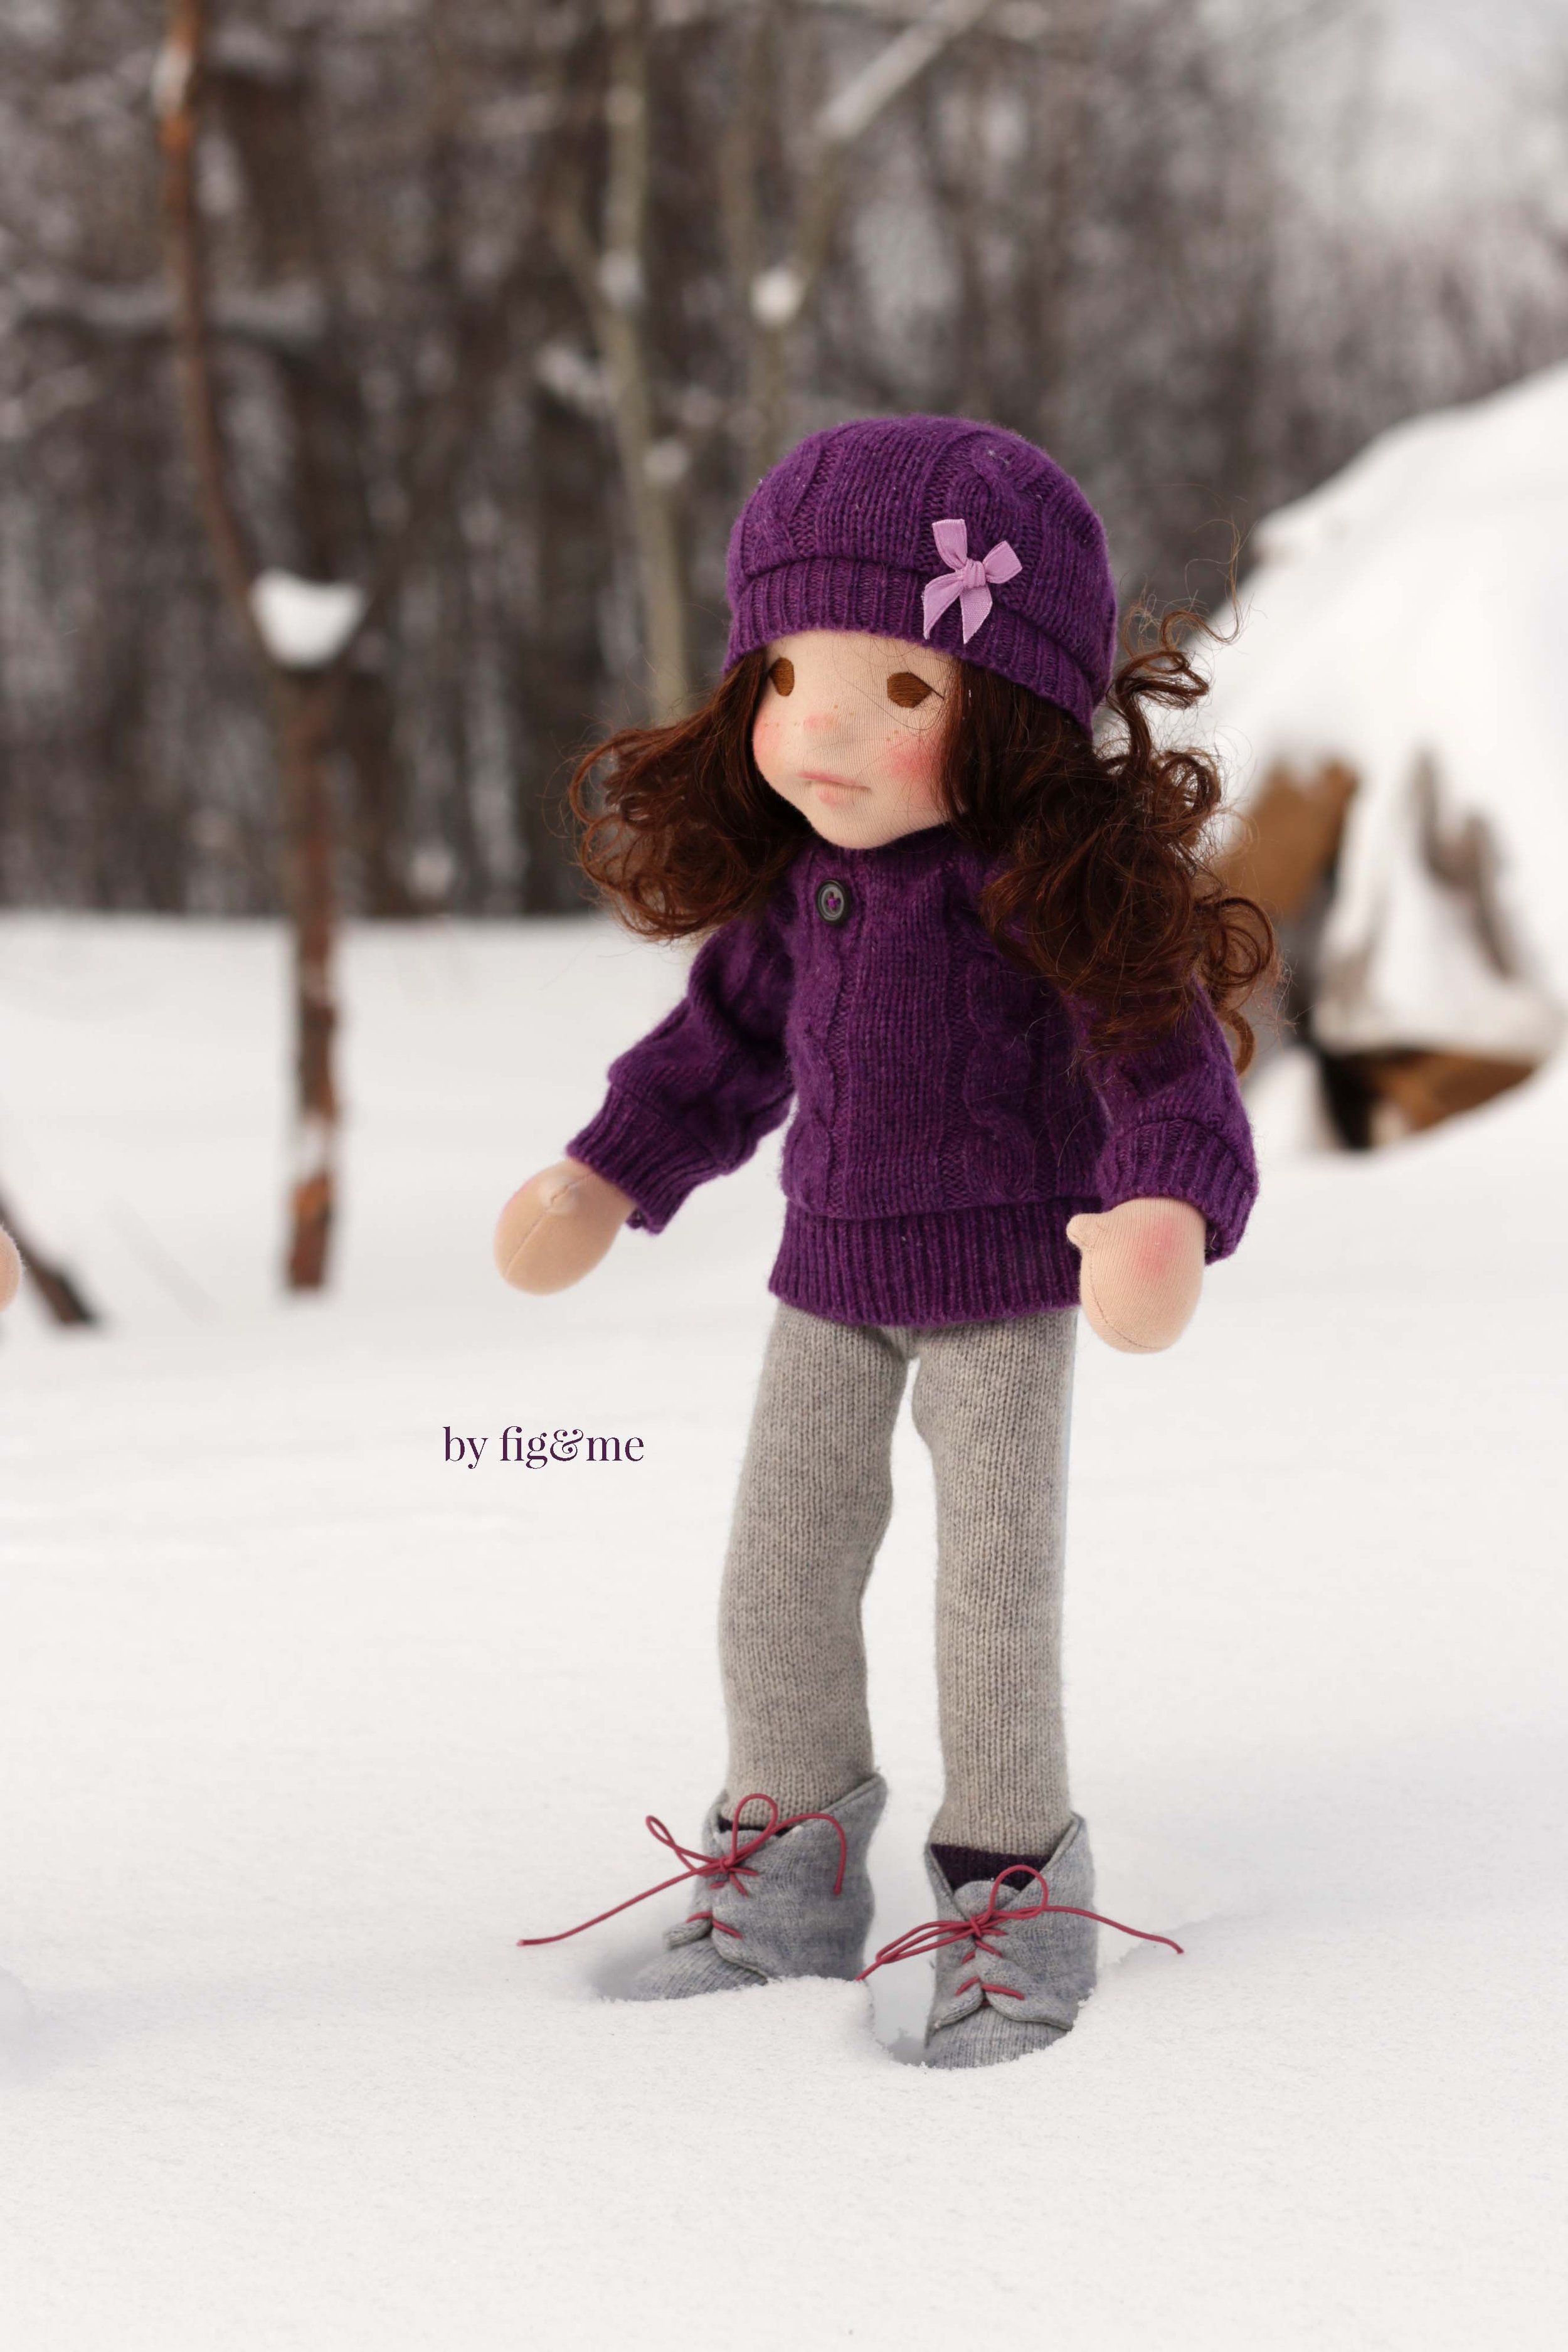 Vivienne Doll Snowman S00 - Art of Living - Sports and Lifestyle